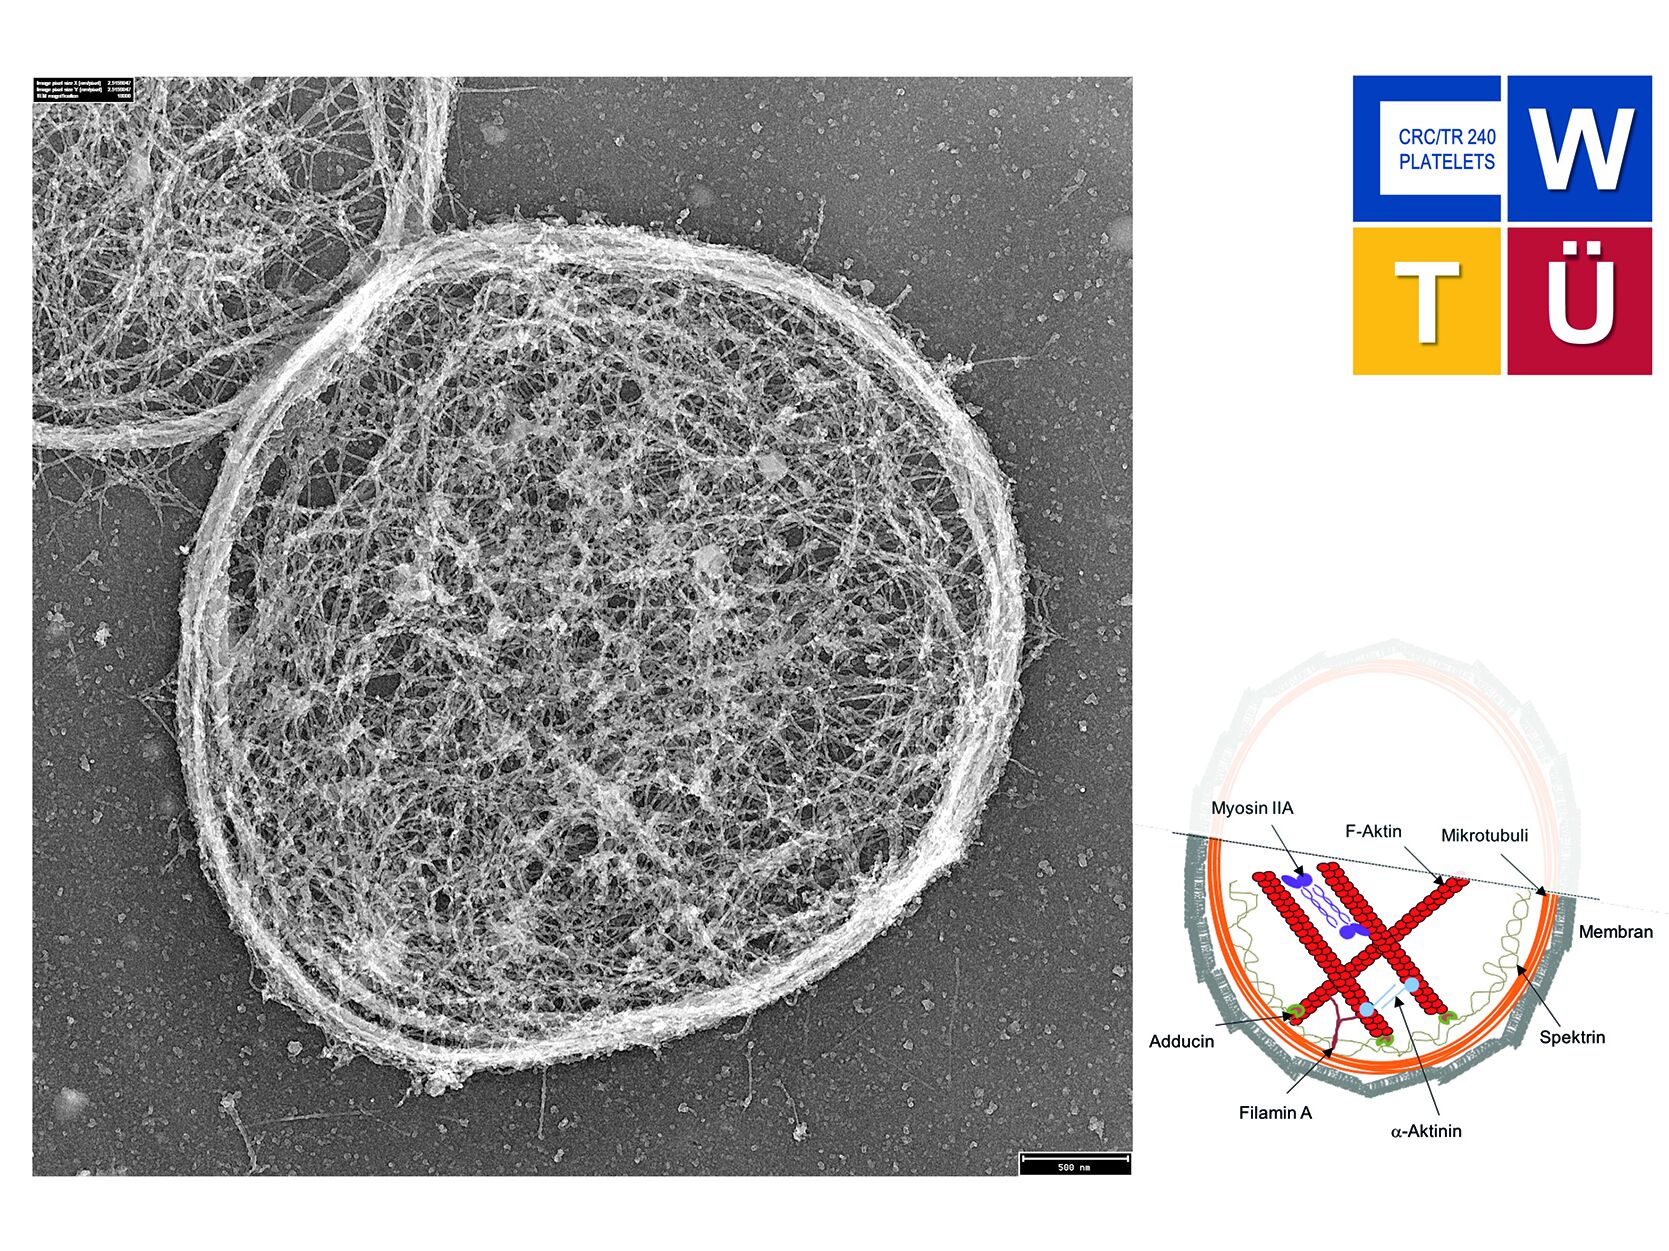 Within the framework of the project, newly developed biophysical methods were used to show that the cytoskeleton of platelets is limited in its function to exert force. © University Hospital Würzburg